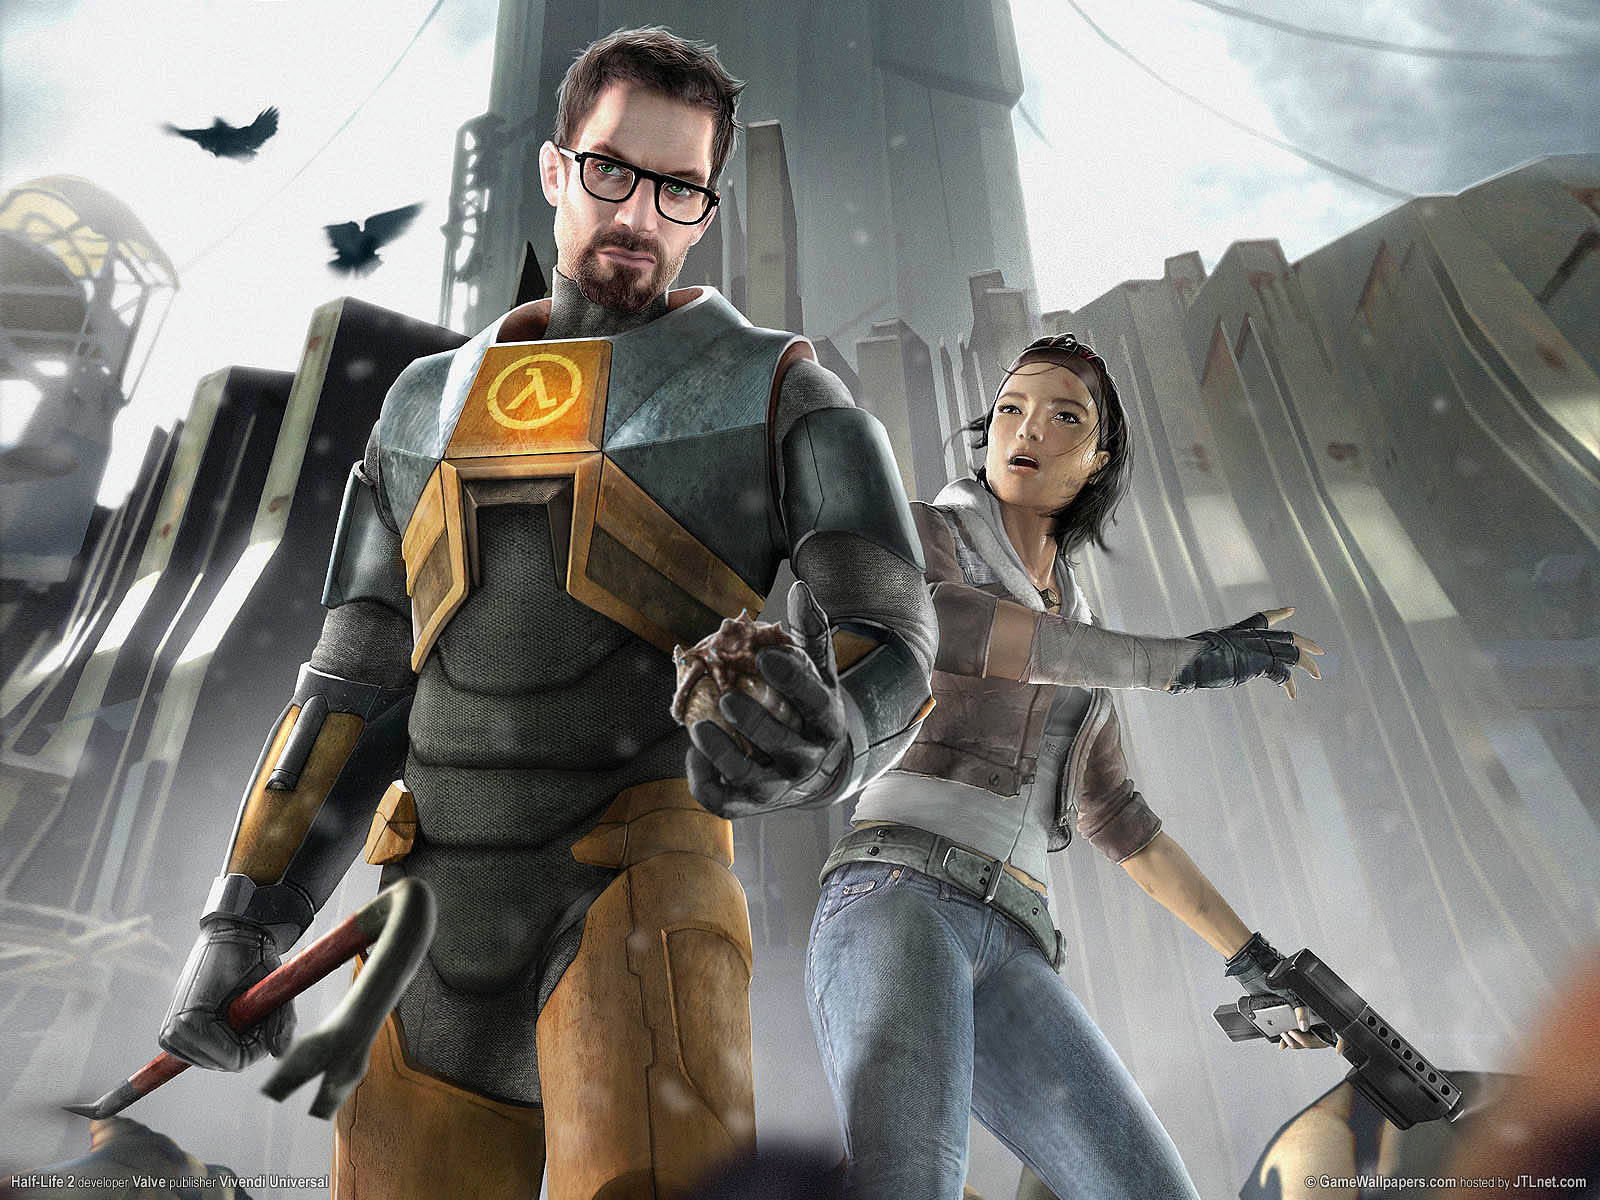 Could we see a Half Life 2: Episode 3? Or even Half Life 3?